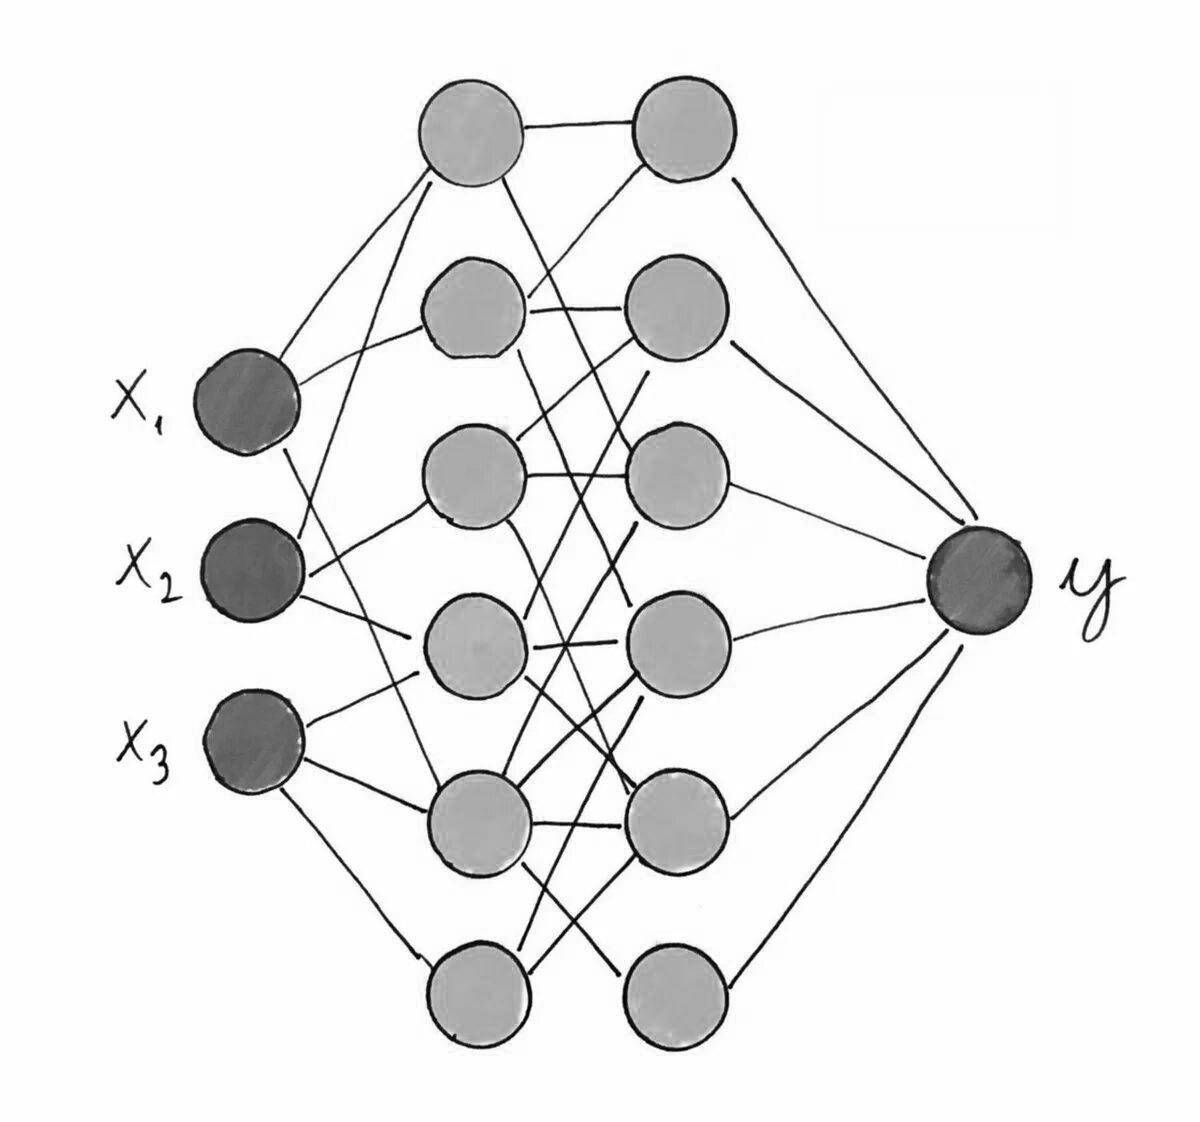 Detailed graph using neural networks